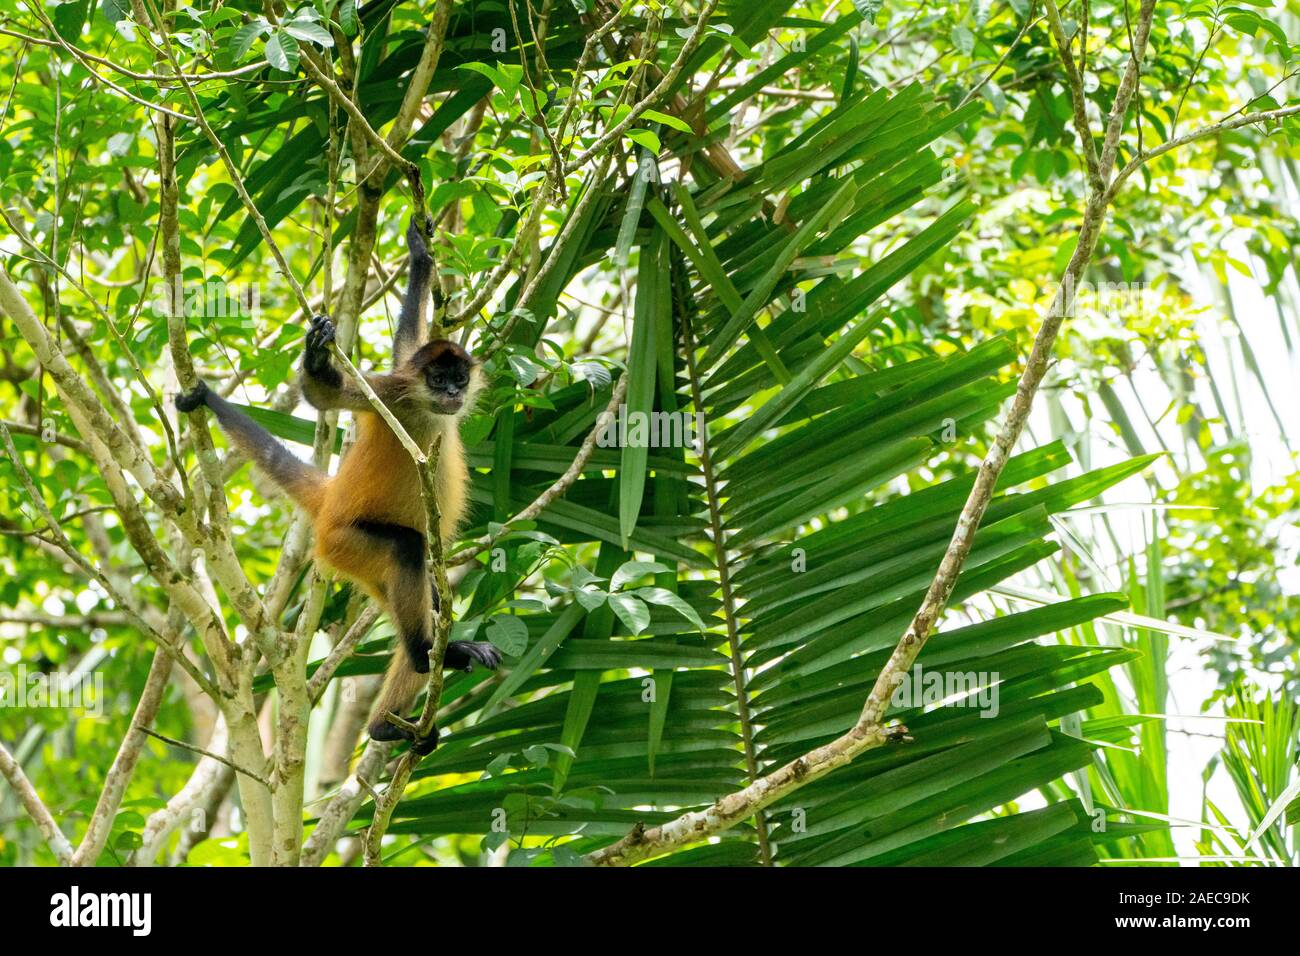 Geoffroy's spider monkey (Ateles geoffroyi) swinging from a brach. Also known as the black-handed spider monkey, is a species of spider monkey, a type Stock Photo